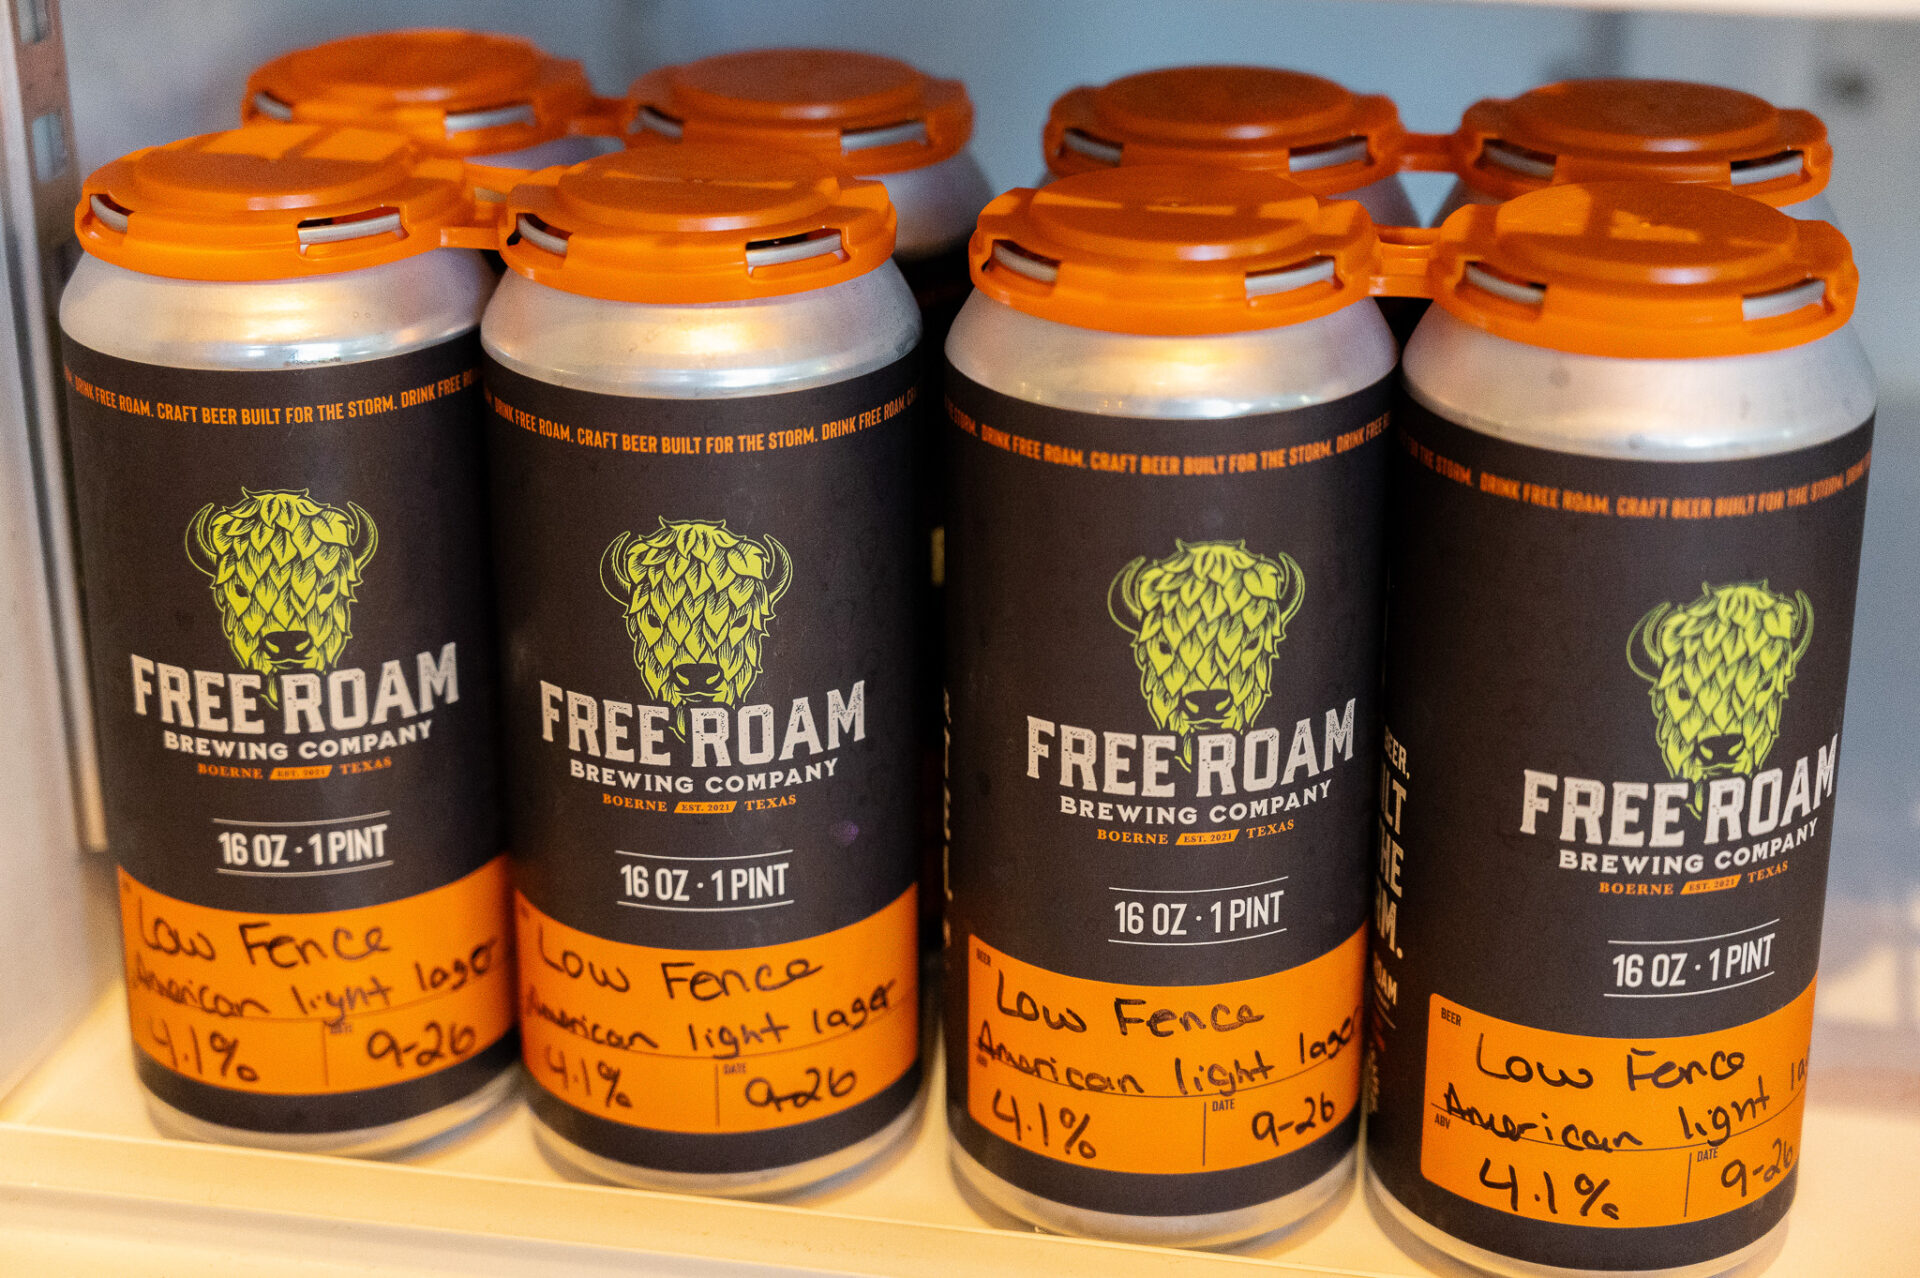 Canned Drink at Free Roam Brewing in Borne Texas